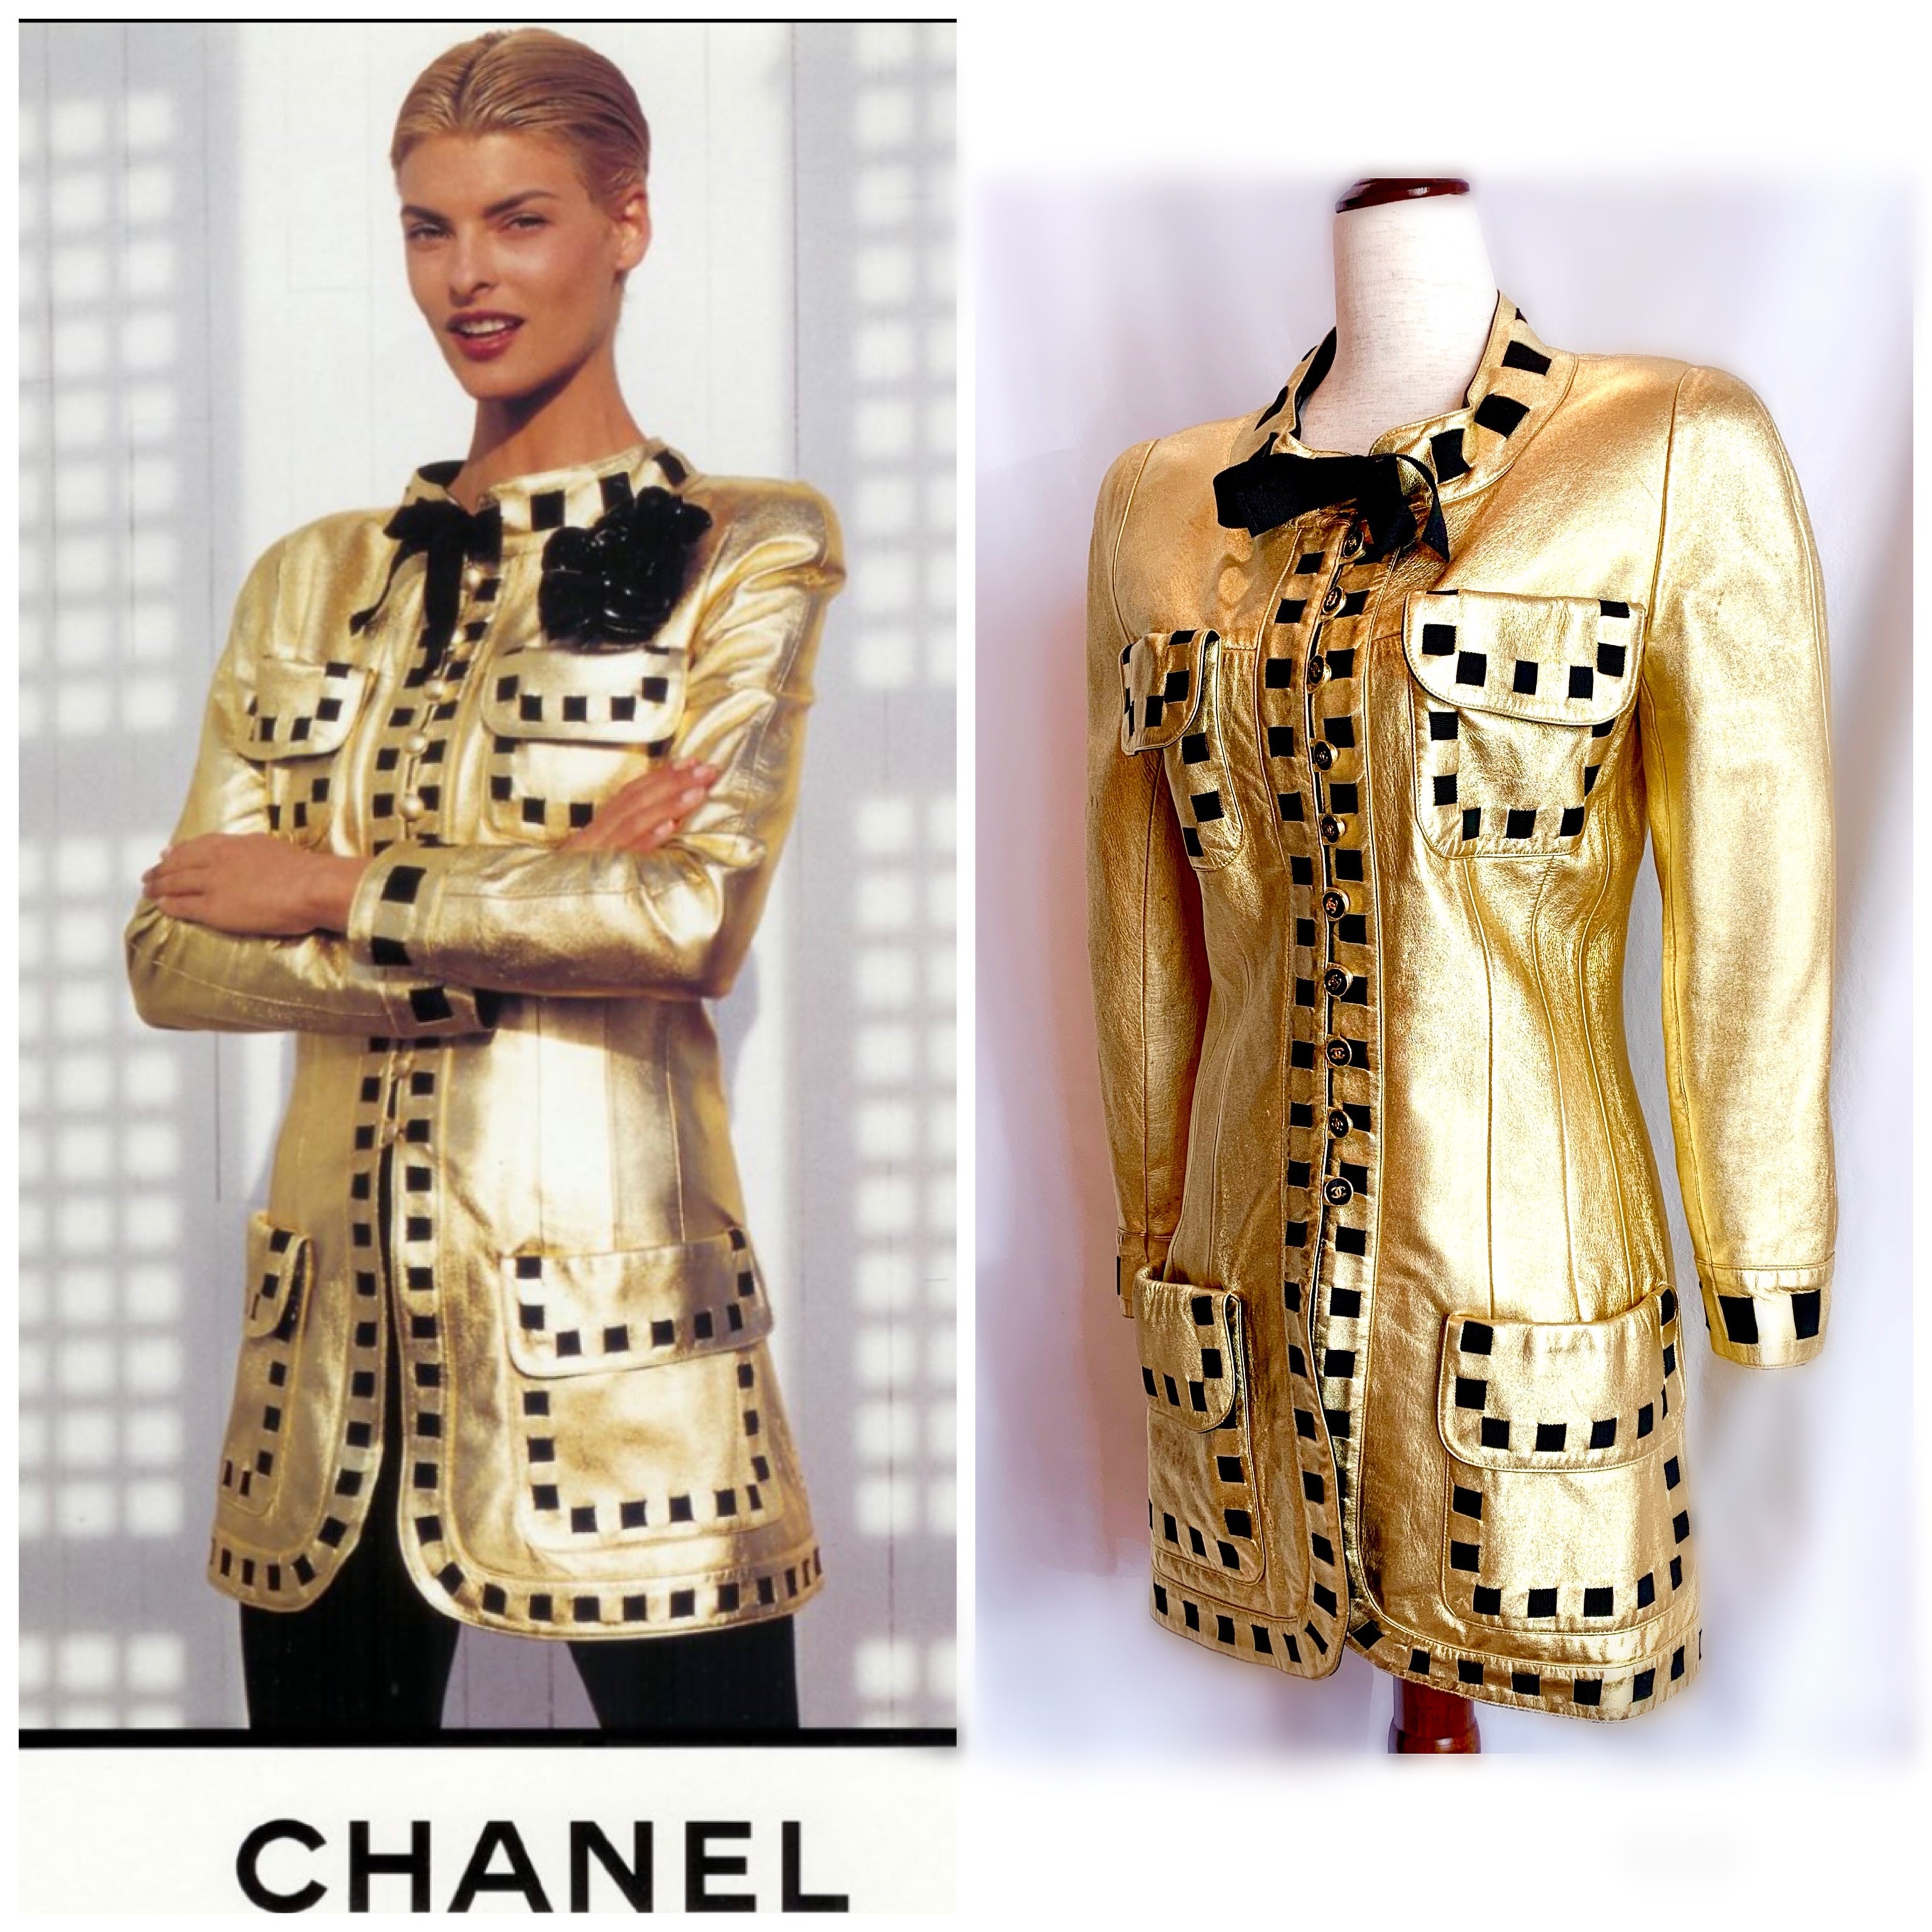 CHANEL JACKETS – The Paris Mademoiselle